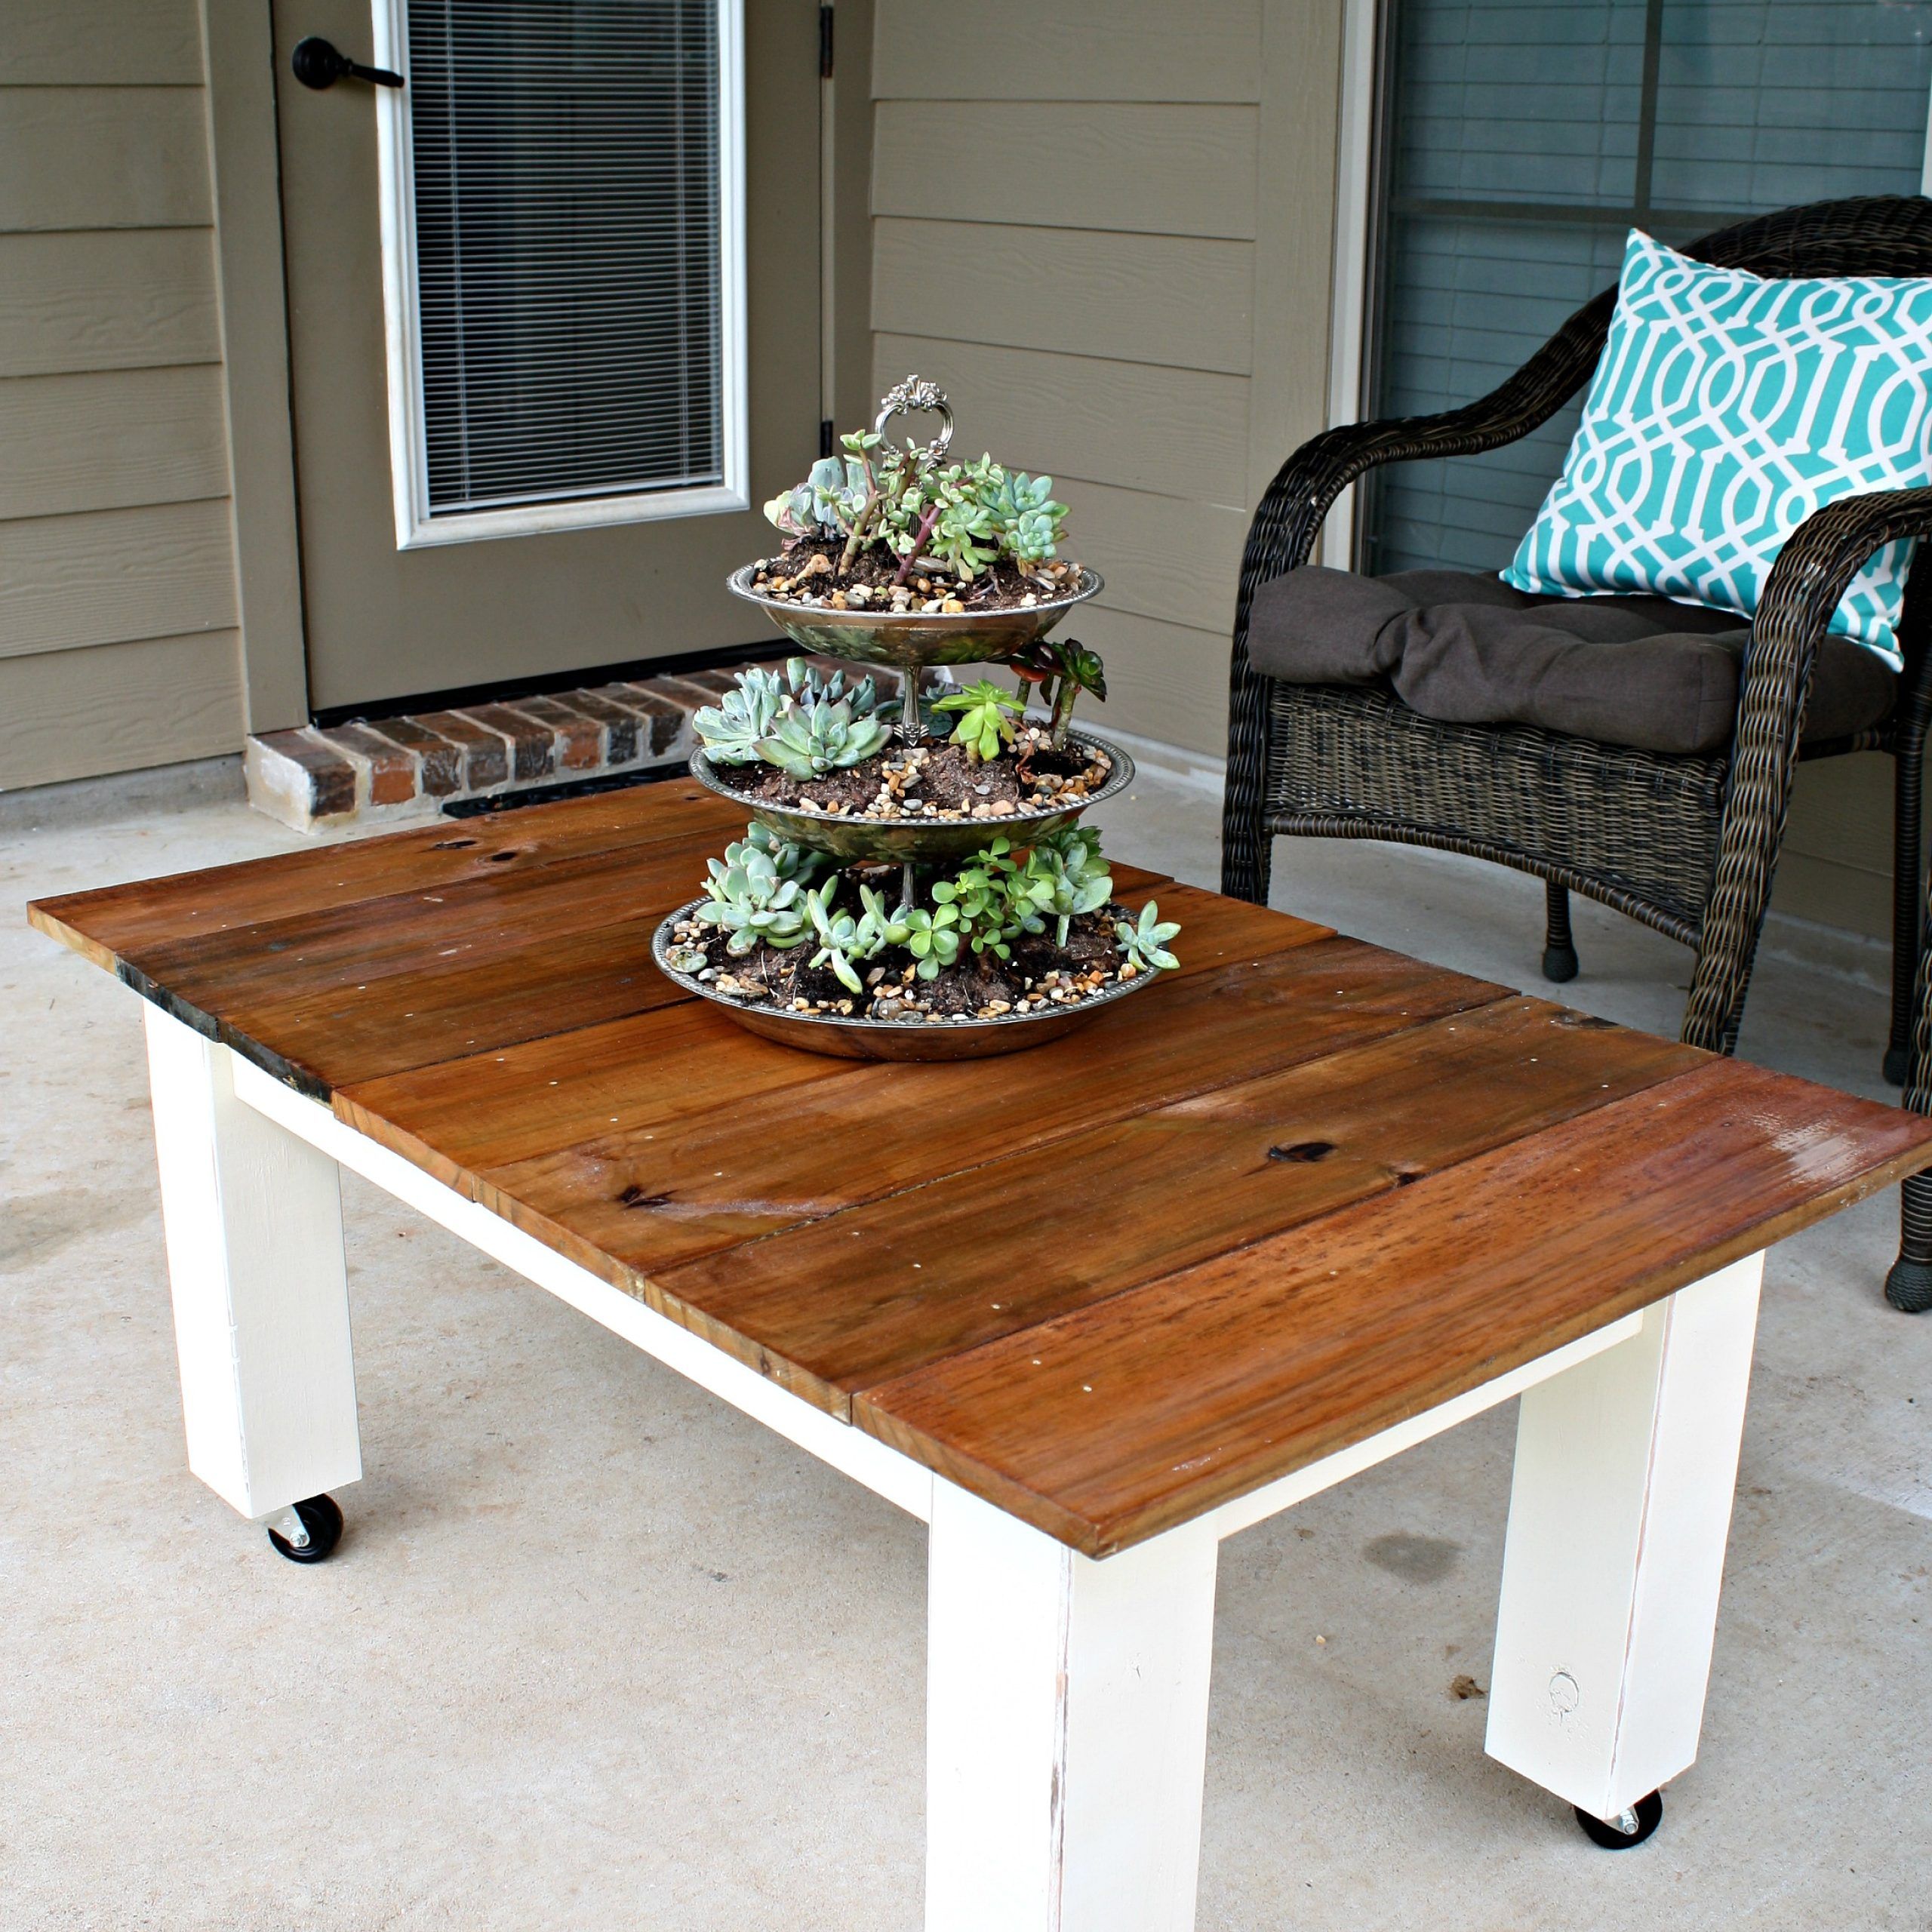 Diy Outdoor Coffee Table – A Diamond In The Stuff With Regard To Outdoor Half Round Coffee Tables (View 11 of 20)